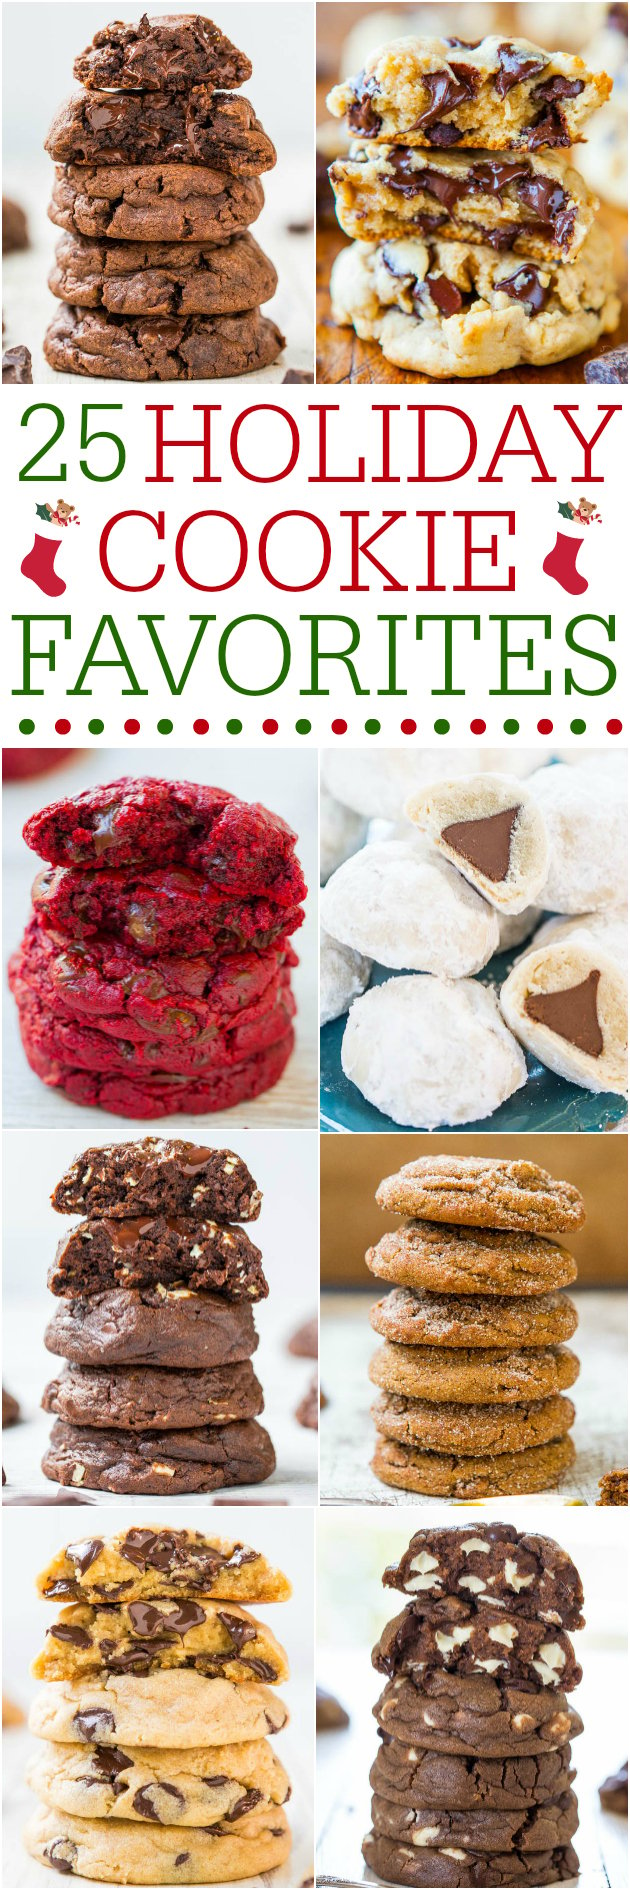 25 Holiday Cookie Favorites - The tried-and-true favorites are all here! If you need a holiday cookie recipe, this collection has you covered!!